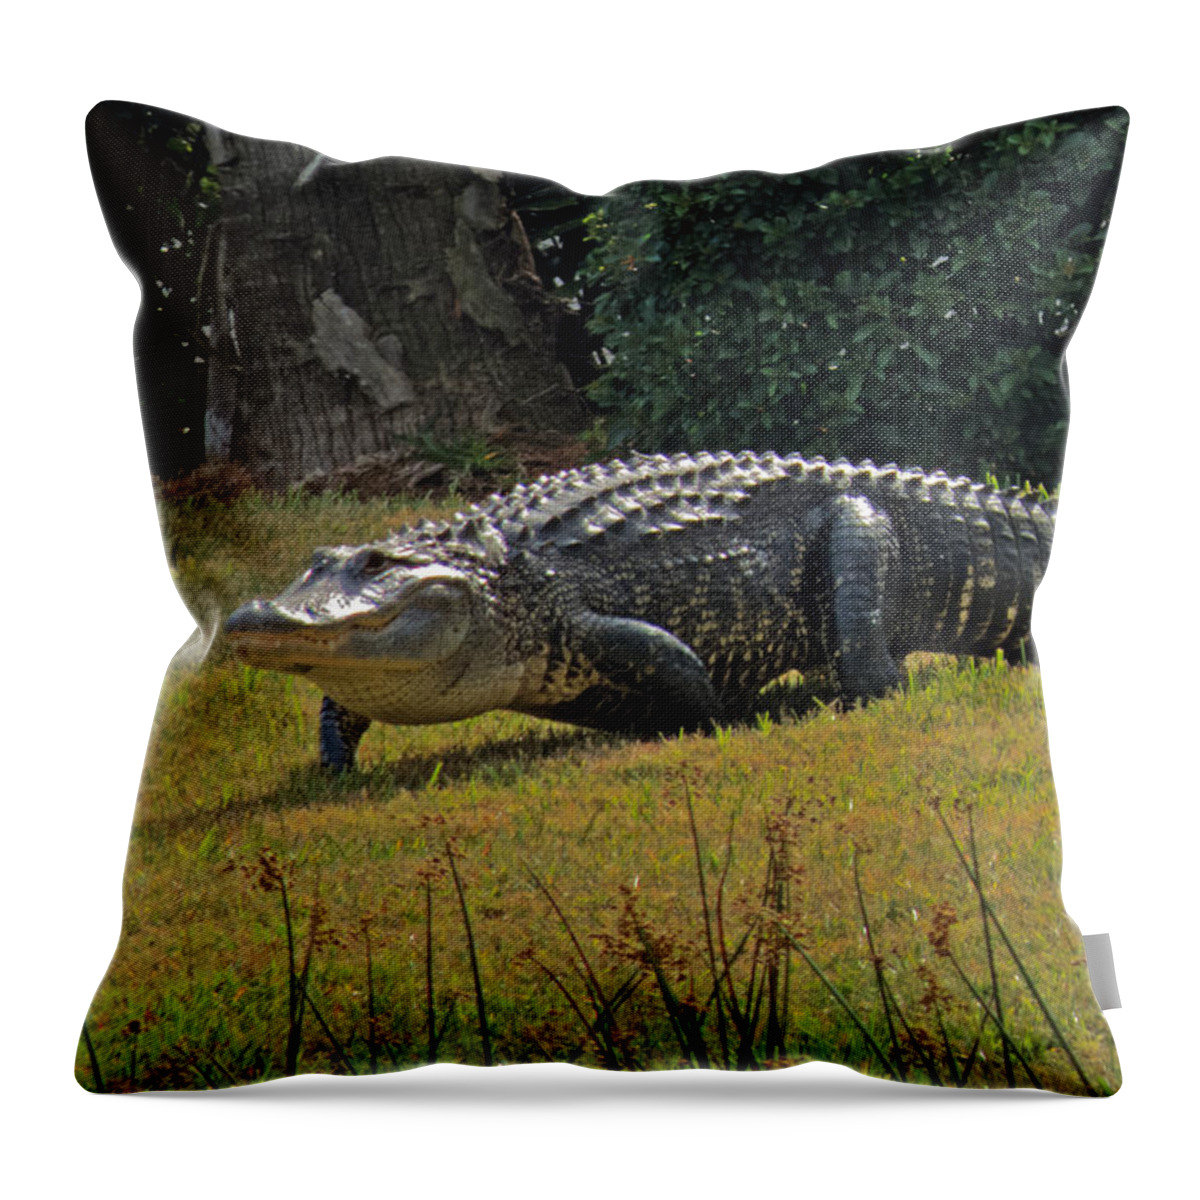 Alligator Throw Pillow featuring the photograph Walking Appetite by T Guy Spencer